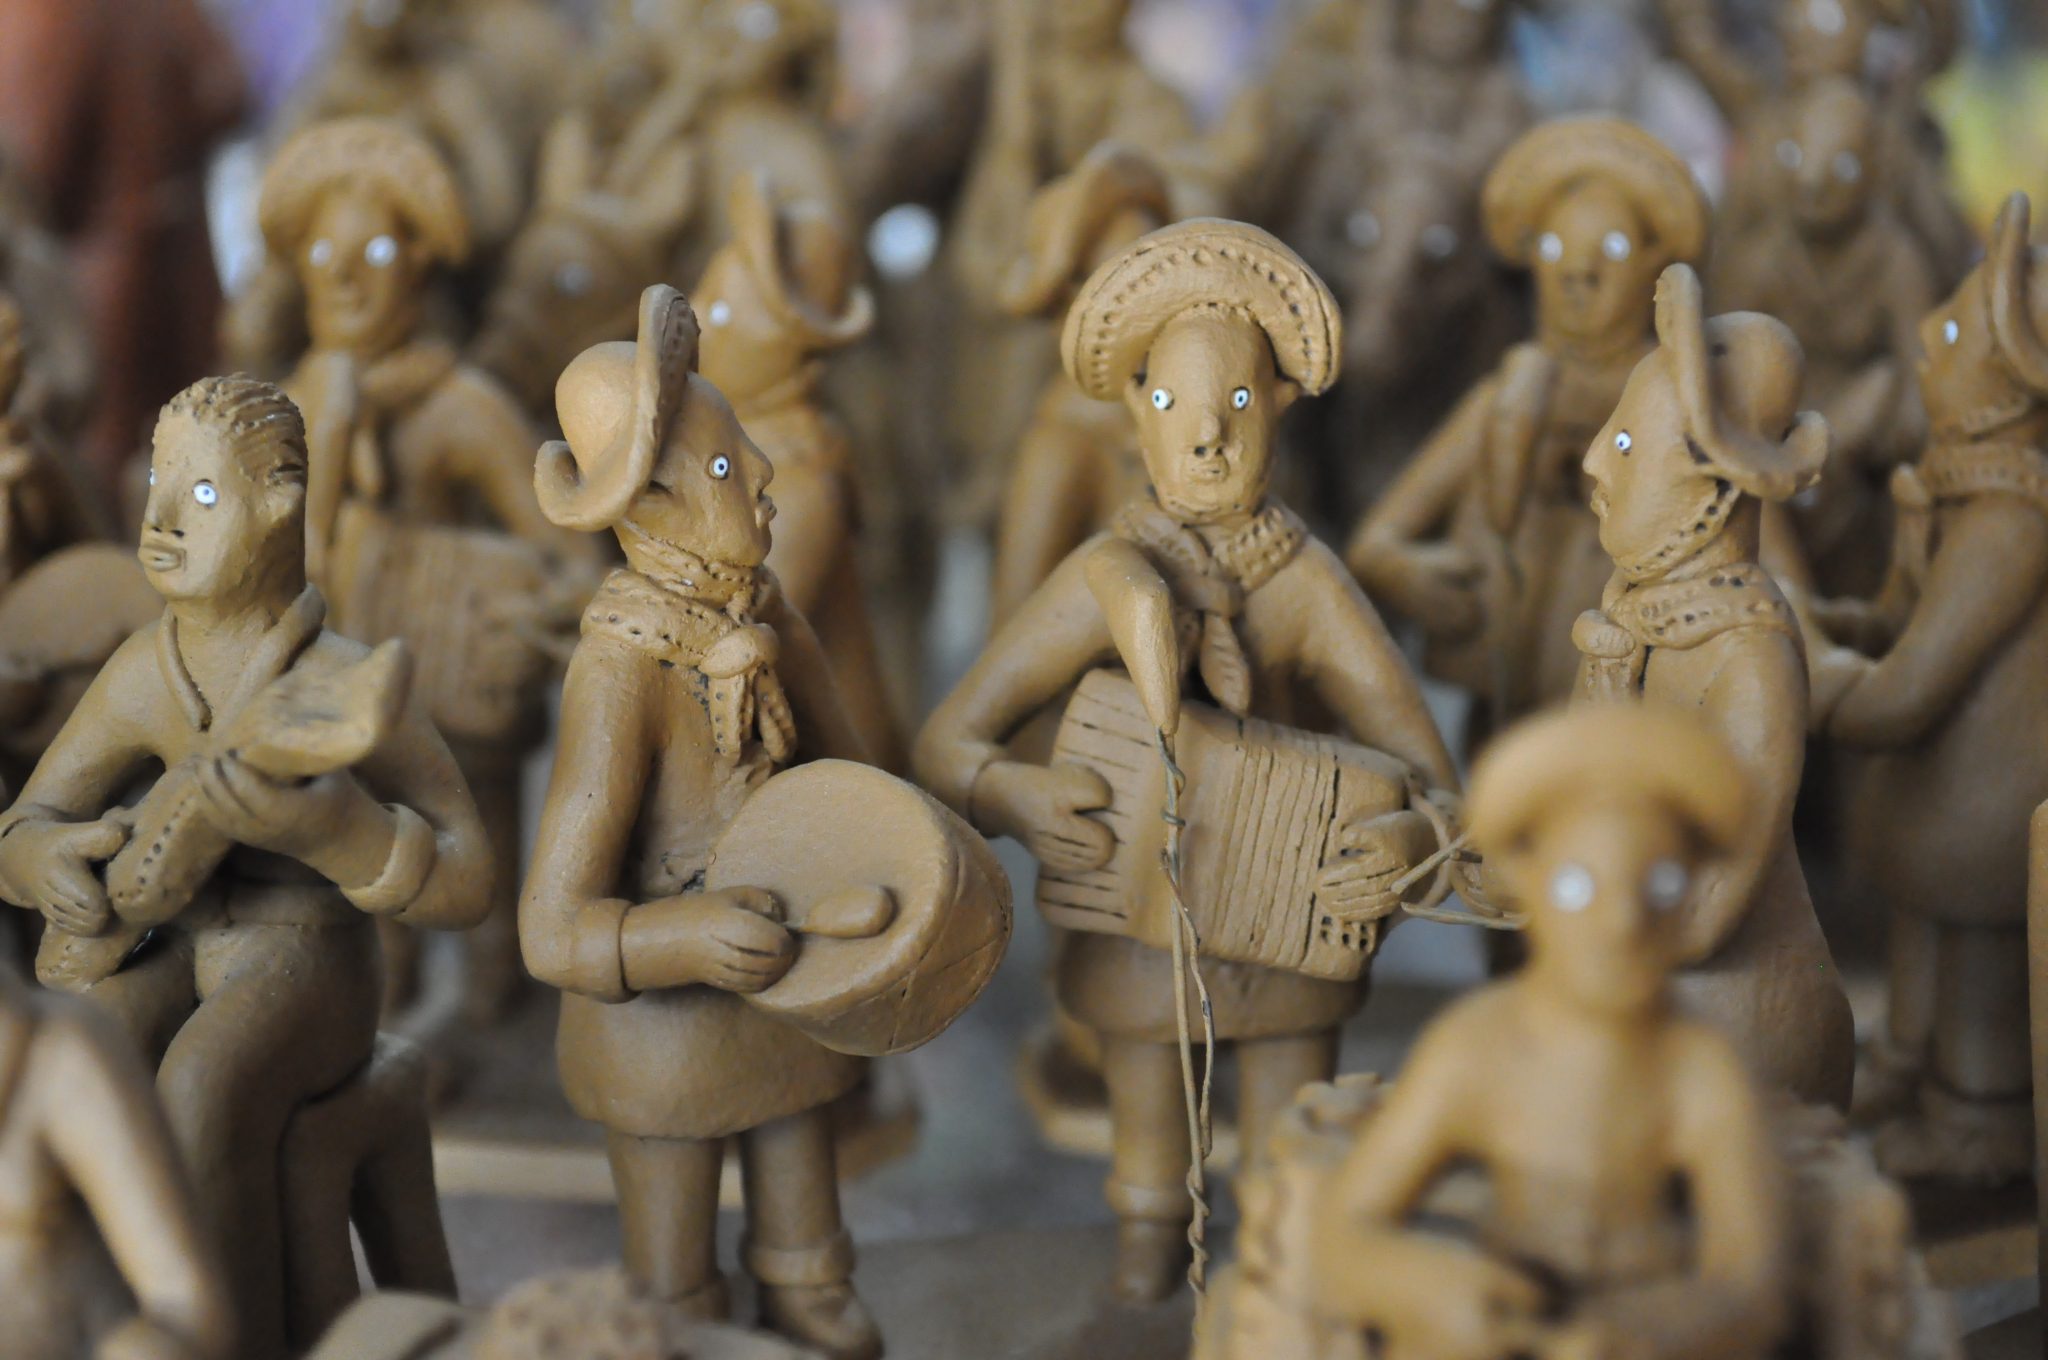 Traditional clay handicraft work from Caruaru, Brazil - WorldPhotographyDay22